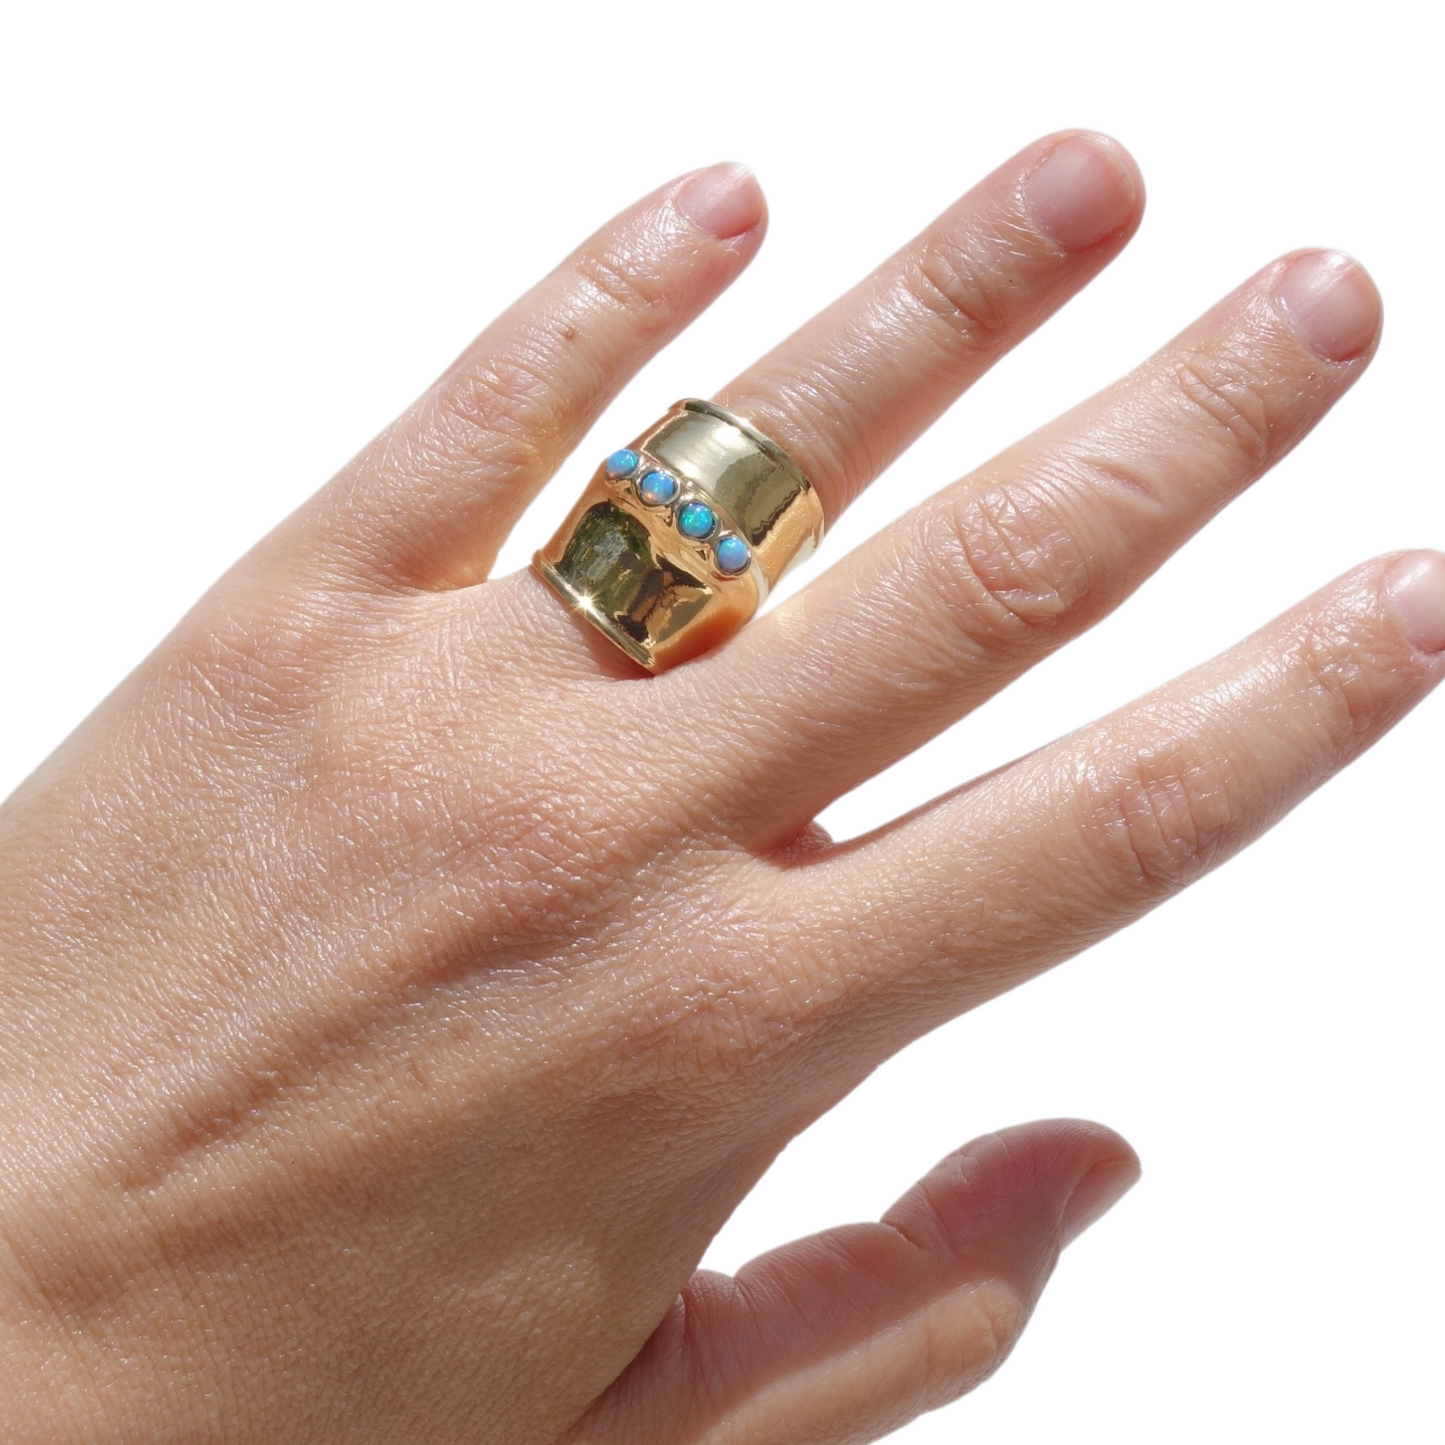 14K SOLID GOLD Armour Ring Decorated with Mosaic Opal Gemstones, Wide Ring